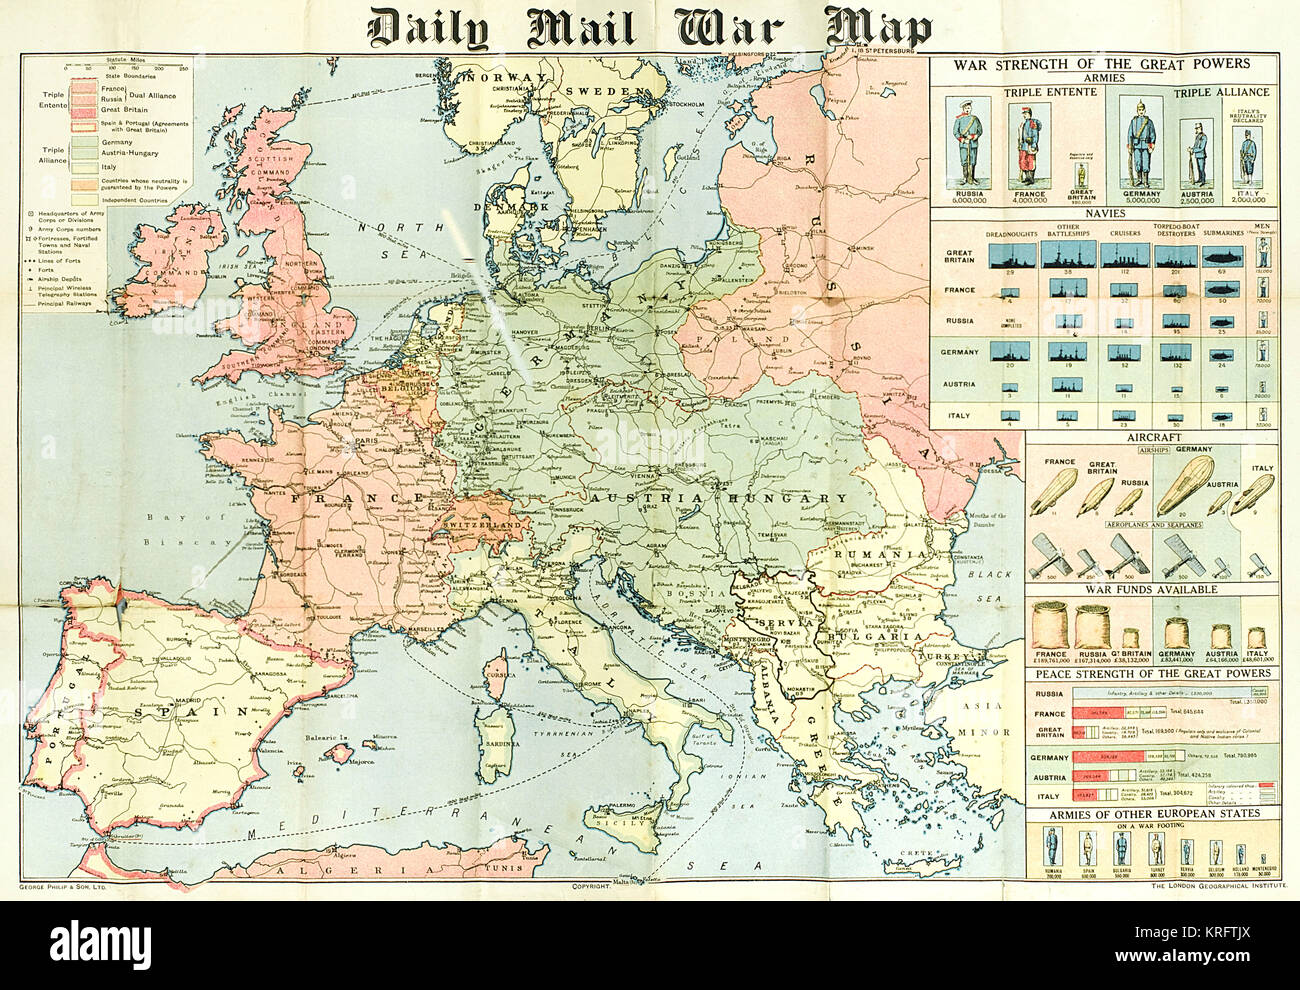 A fold out war map issued by the Daily Mail in the early weeks of the First World War.  The map offers statistics regarding the manpower strength of each of the warring nations, as well as the number of battleships and food stores each had.  While the Triple Entente of Britain, France and Russia could boast 9,380,000 men (of which Britain comprised just 380,000), the Triple Alliance numbered 9,500,000.  The map was intended to be marked with Philips' flag pins in 'ten different colours' so that civilians could chart the progress of the campaign.       Date: 1914 Stock Photo